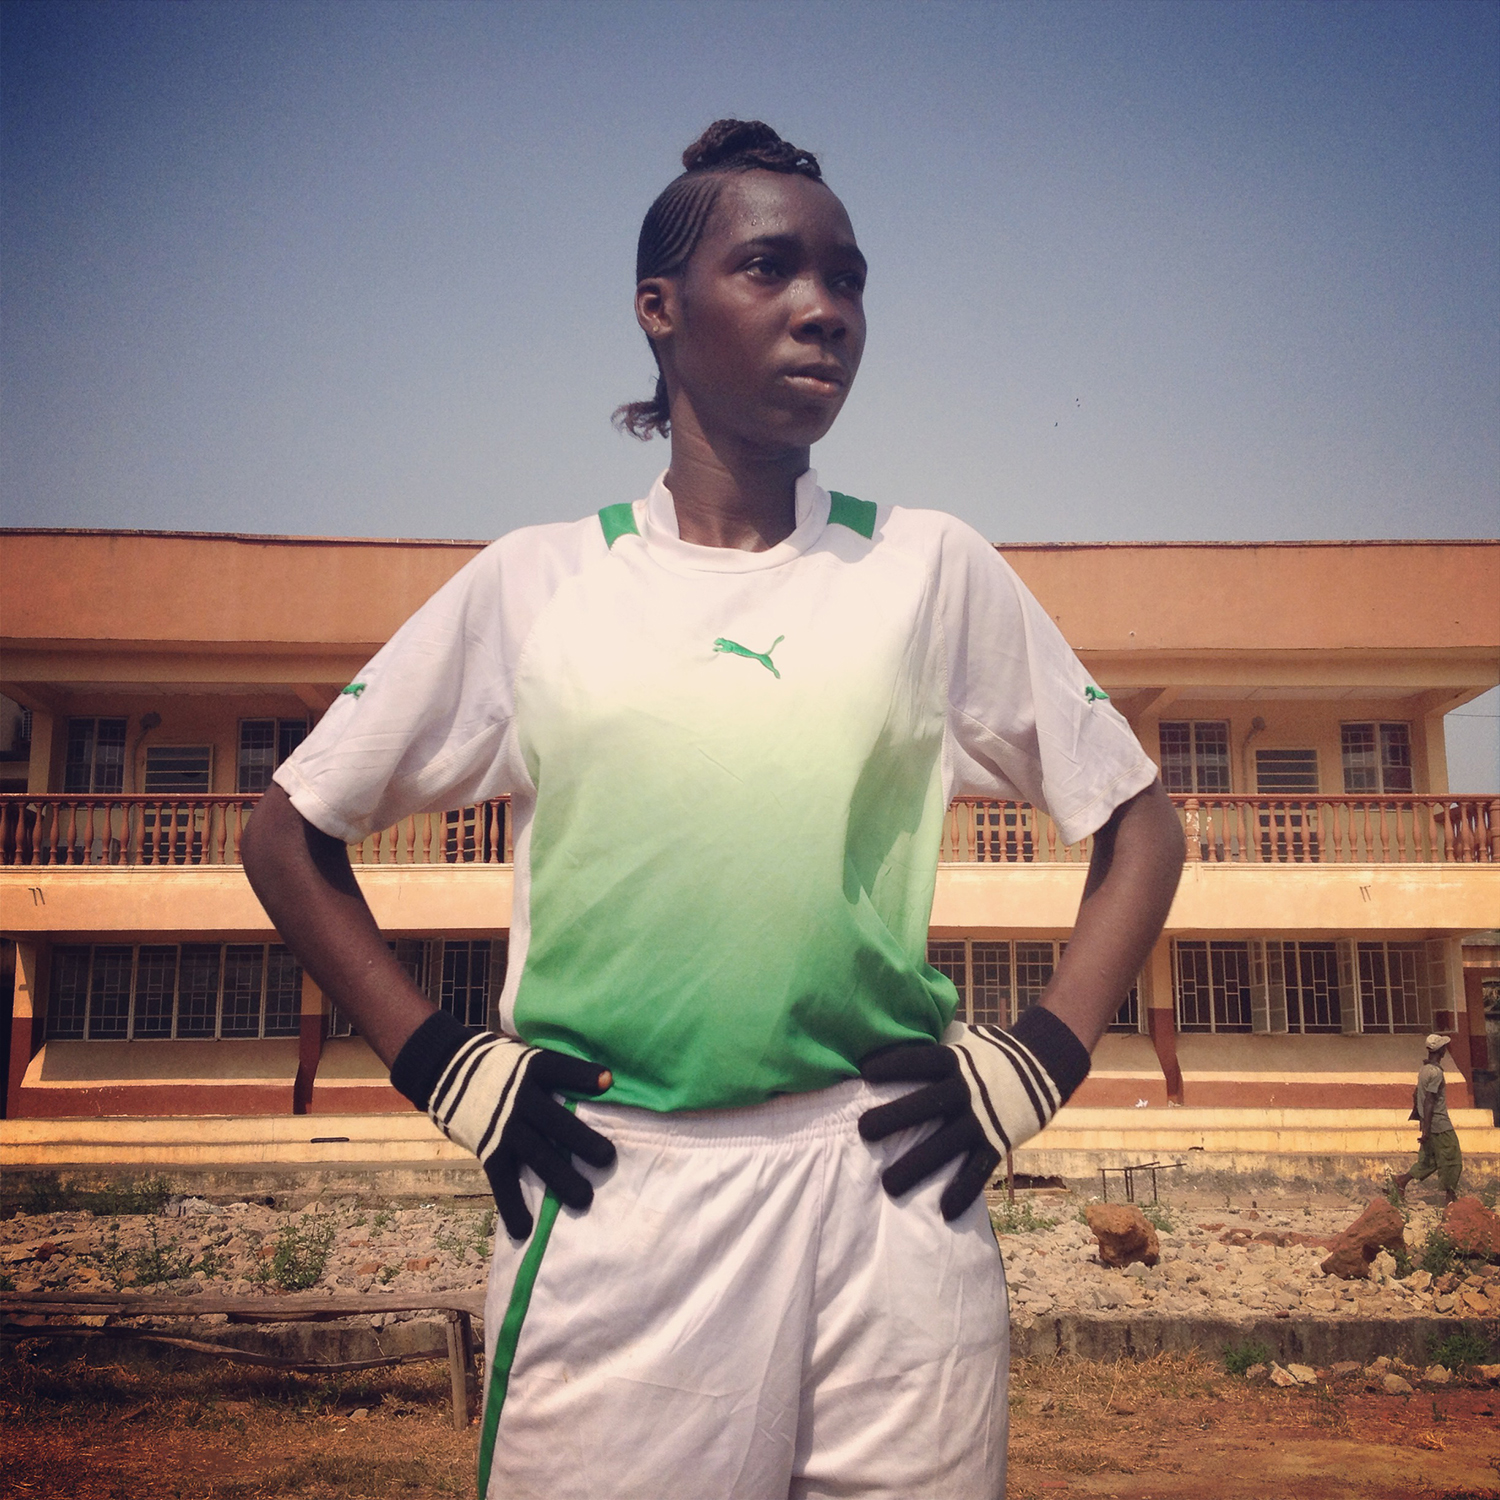 Mar. 7, 2014. What a man do, a woman can do. Jeneba Koroma, Sierra Leone Queens footballers is one of the beautiful ladies I stumbled upon in their camp during a short assignment for FIFA weekly magazine. I also admire her natural hair that she made stylish. I wish they win in their next game against Liberia.